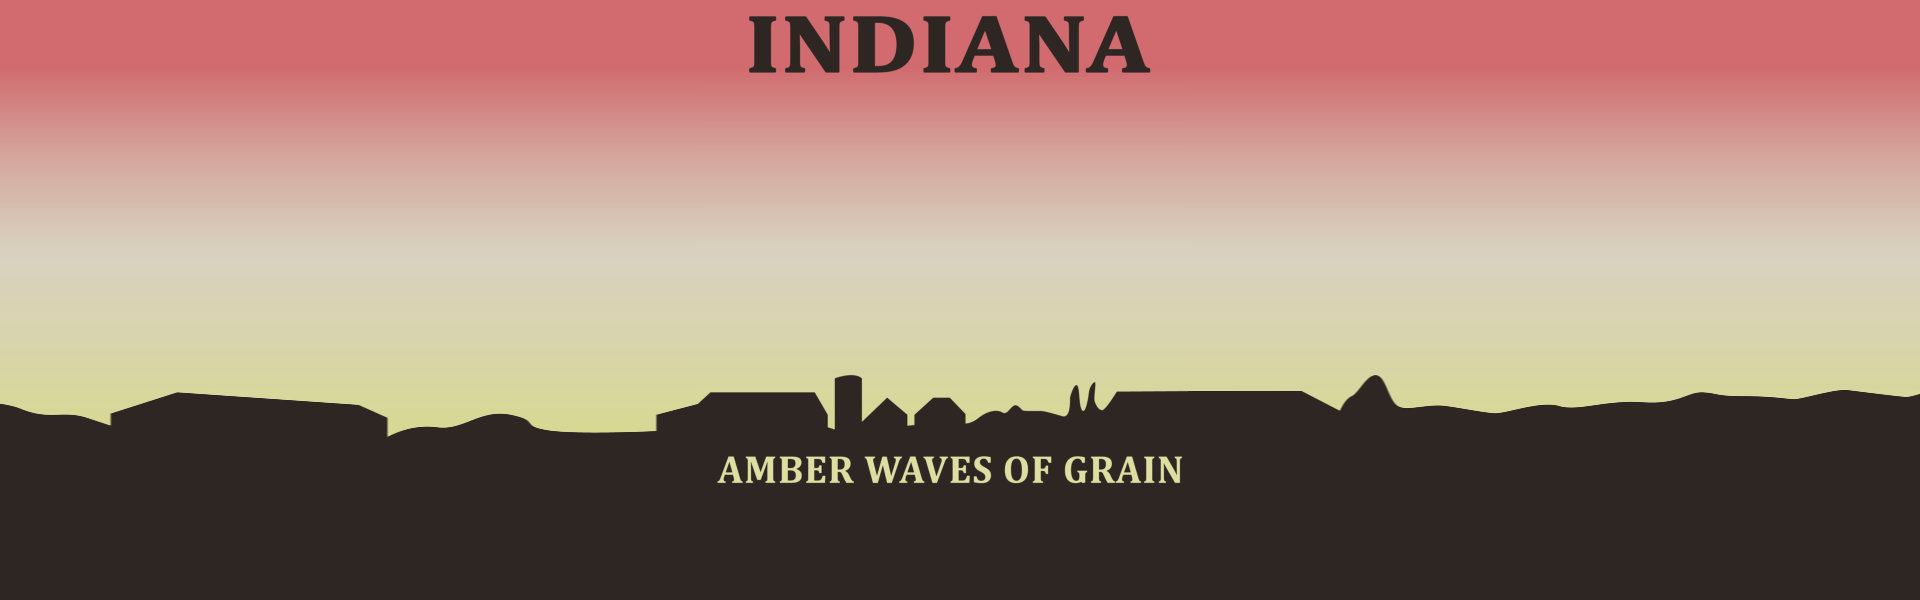 Indiana Amber Waves of Grain